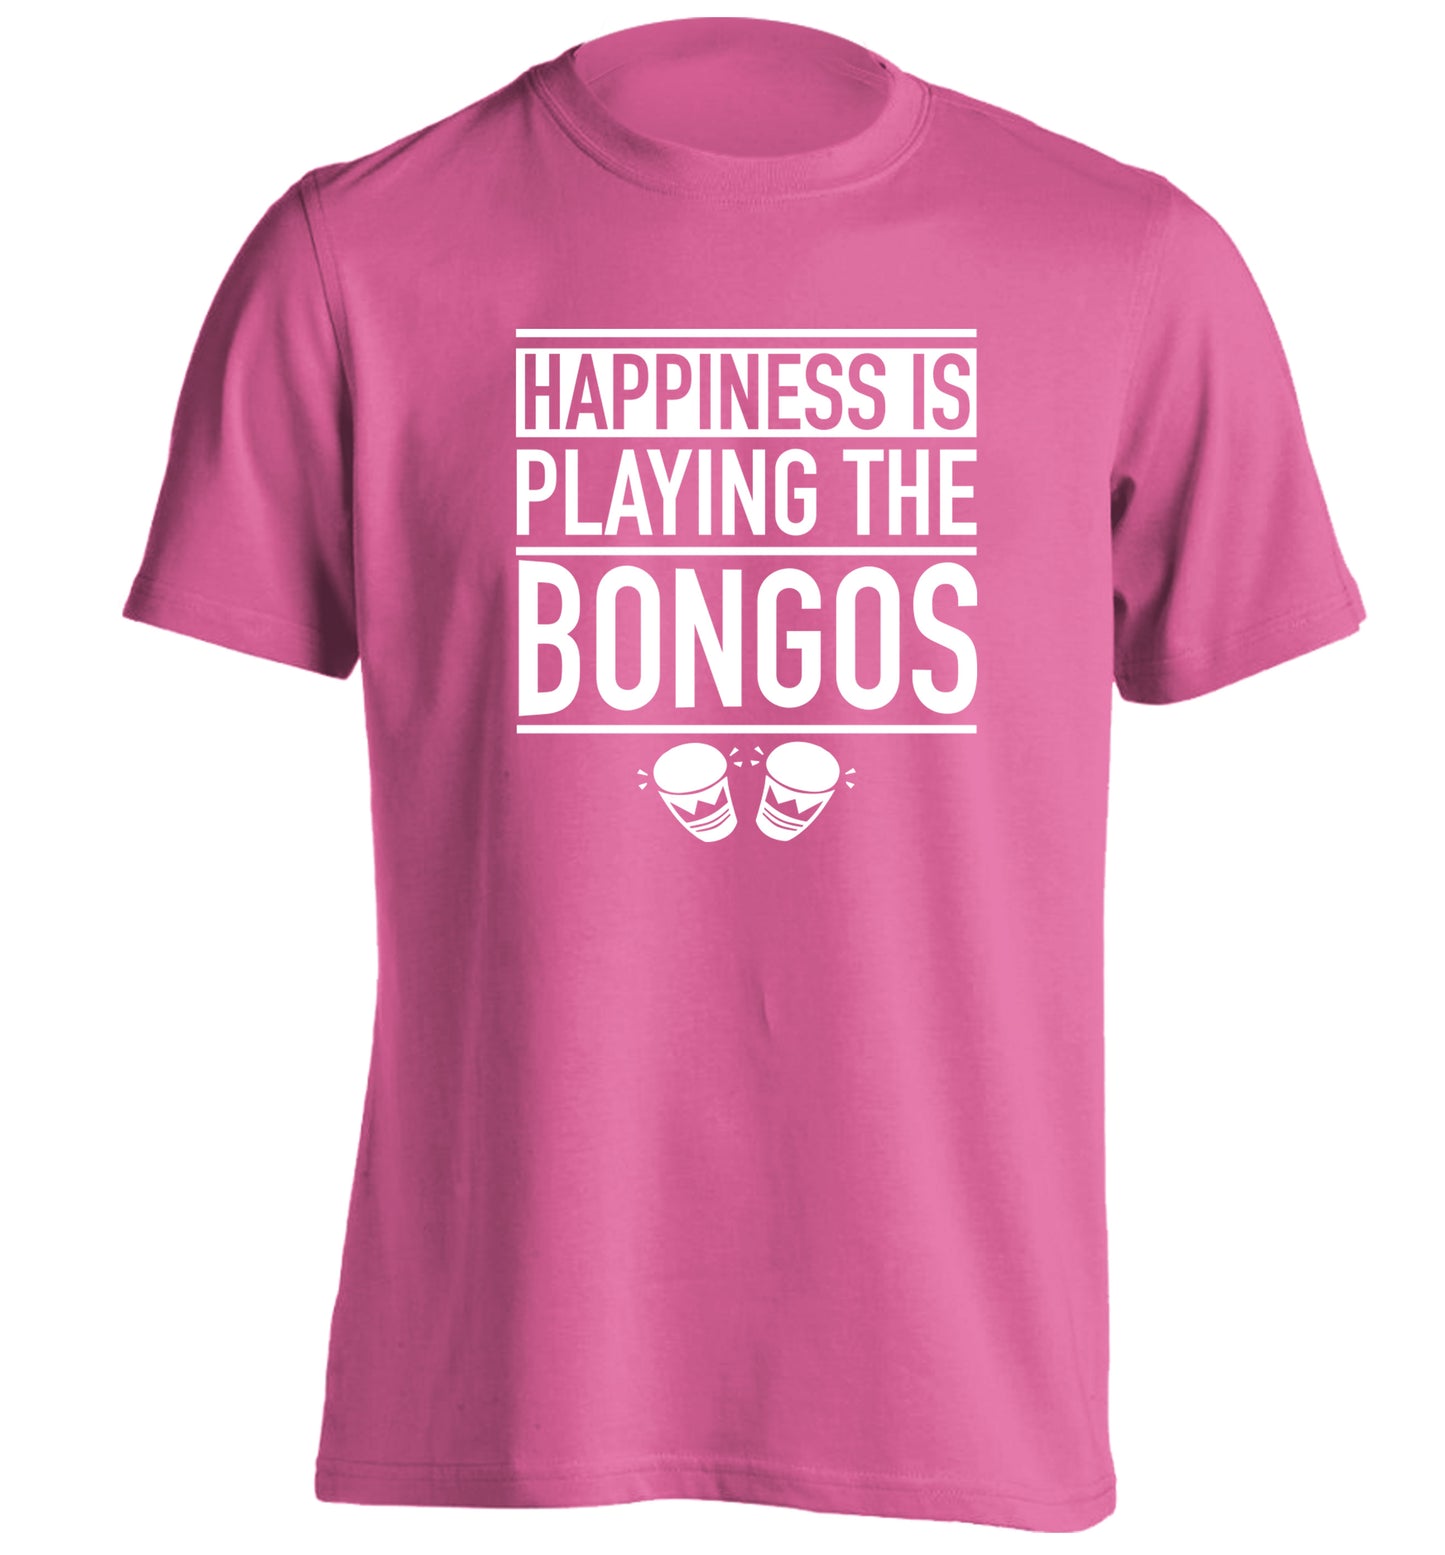 Happiness is playing the bongos adults unisex pink Tshirt 2XL